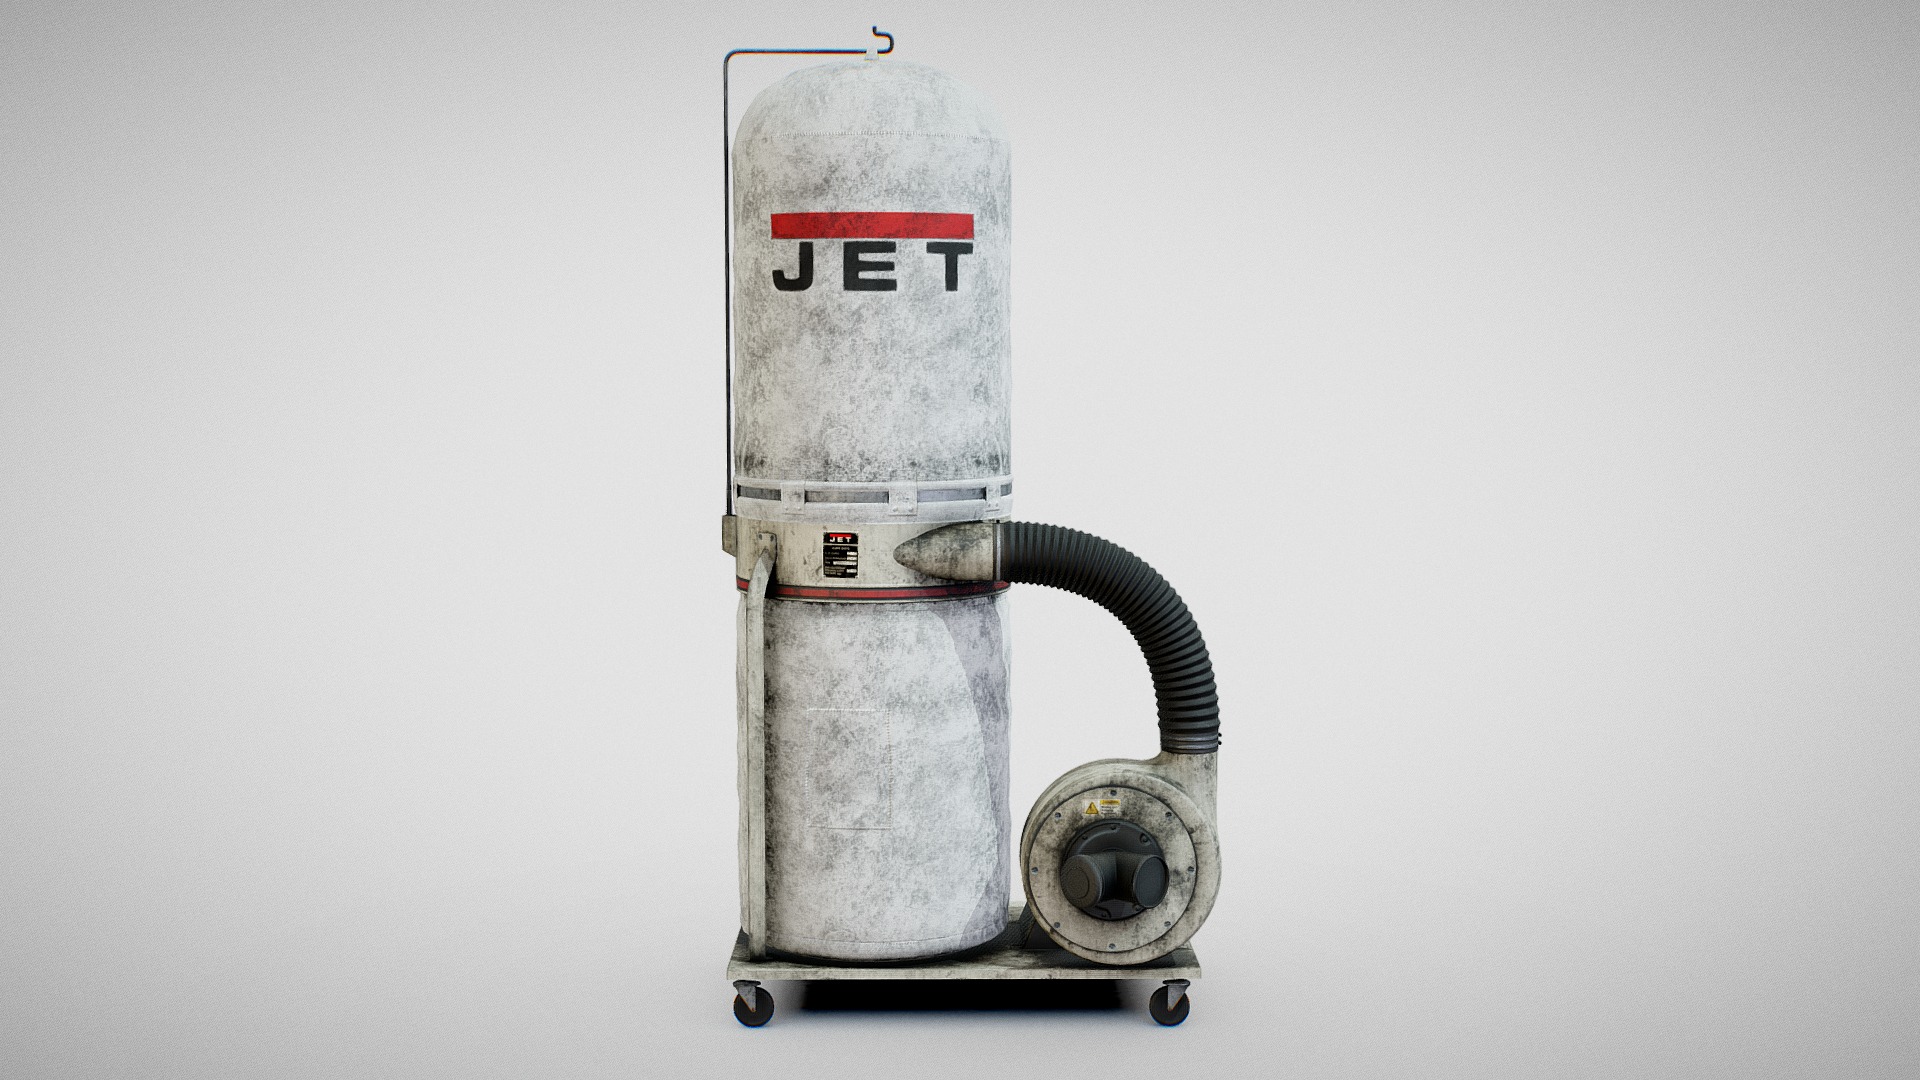 3D model Sawdust Collector – JET (Dirty) - This is a 3D model of the Sawdust Collector - JET (Dirty). The 3D model is about a metal object with a screw.